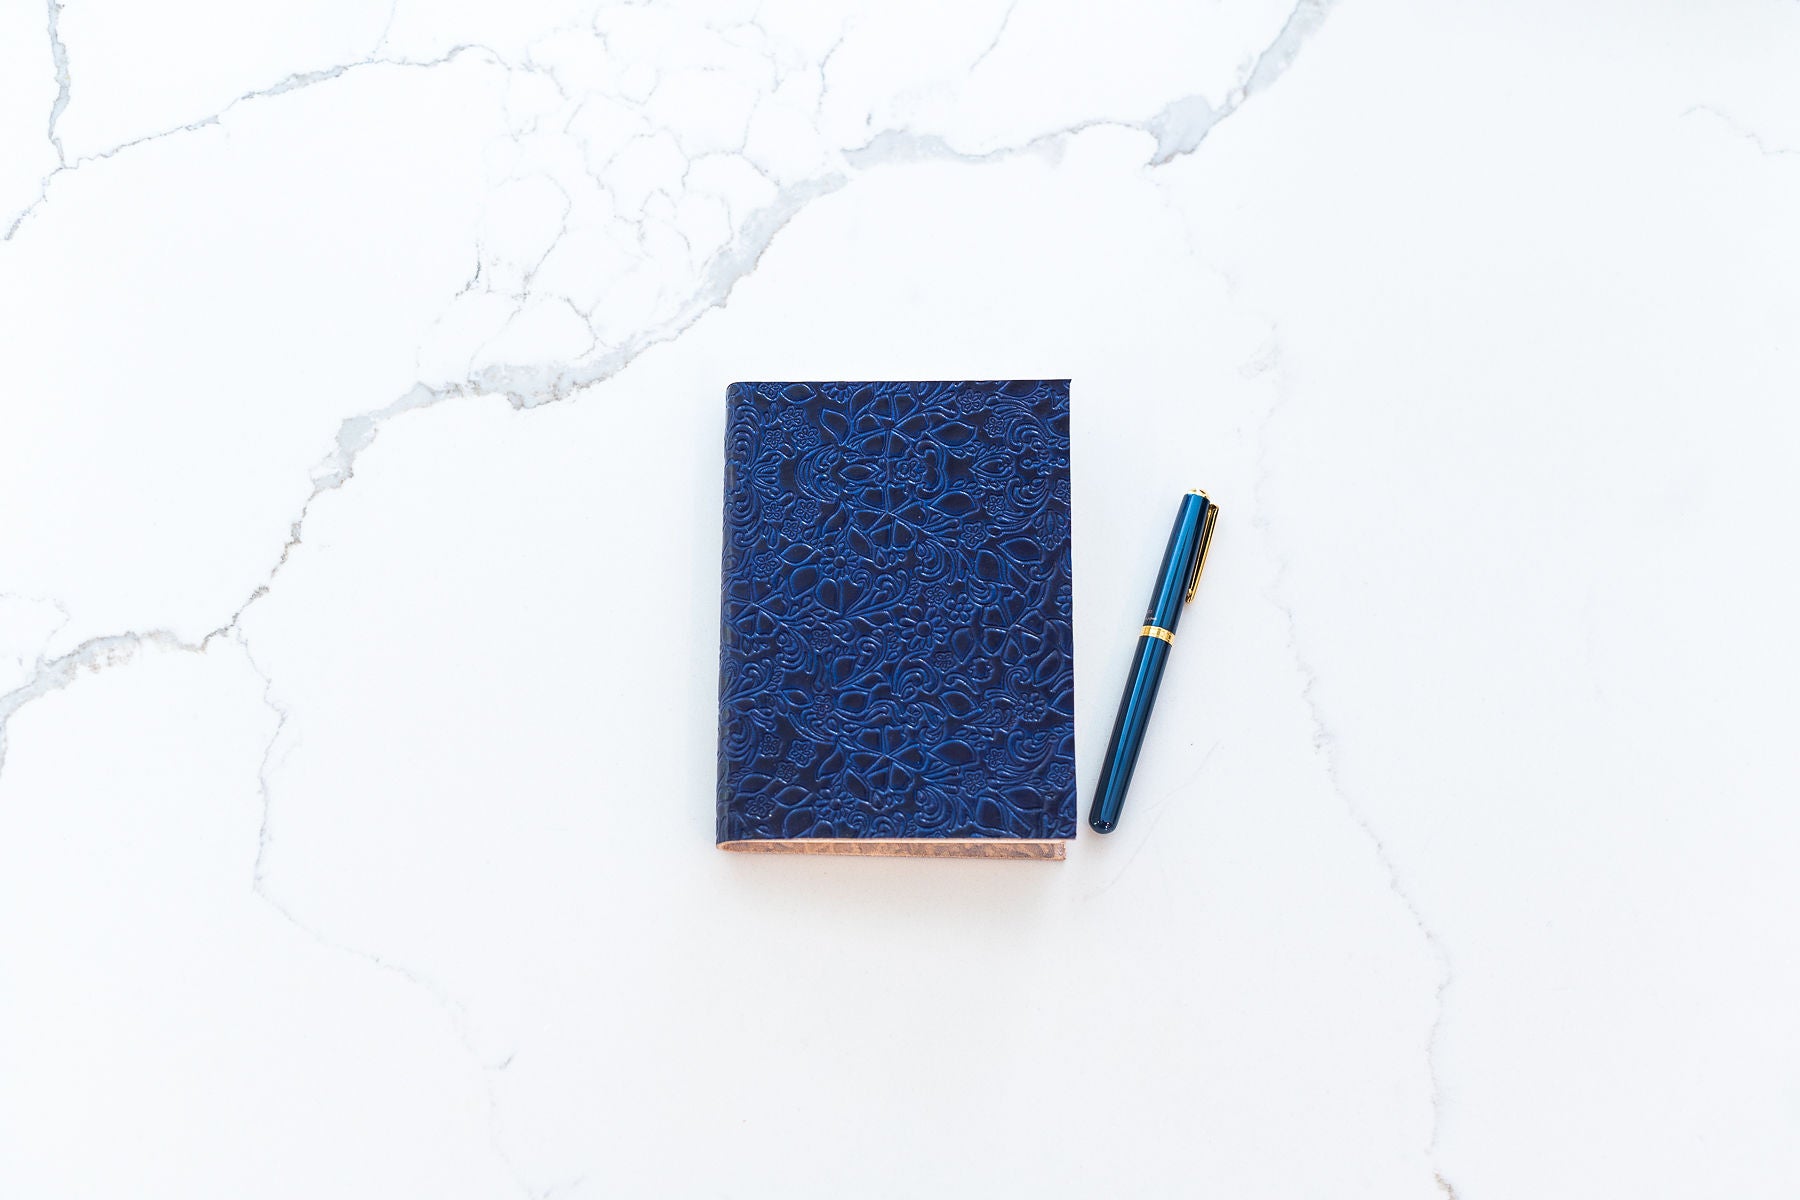 Embossed Buffalo Leather Journal/Notebook - Sapphire